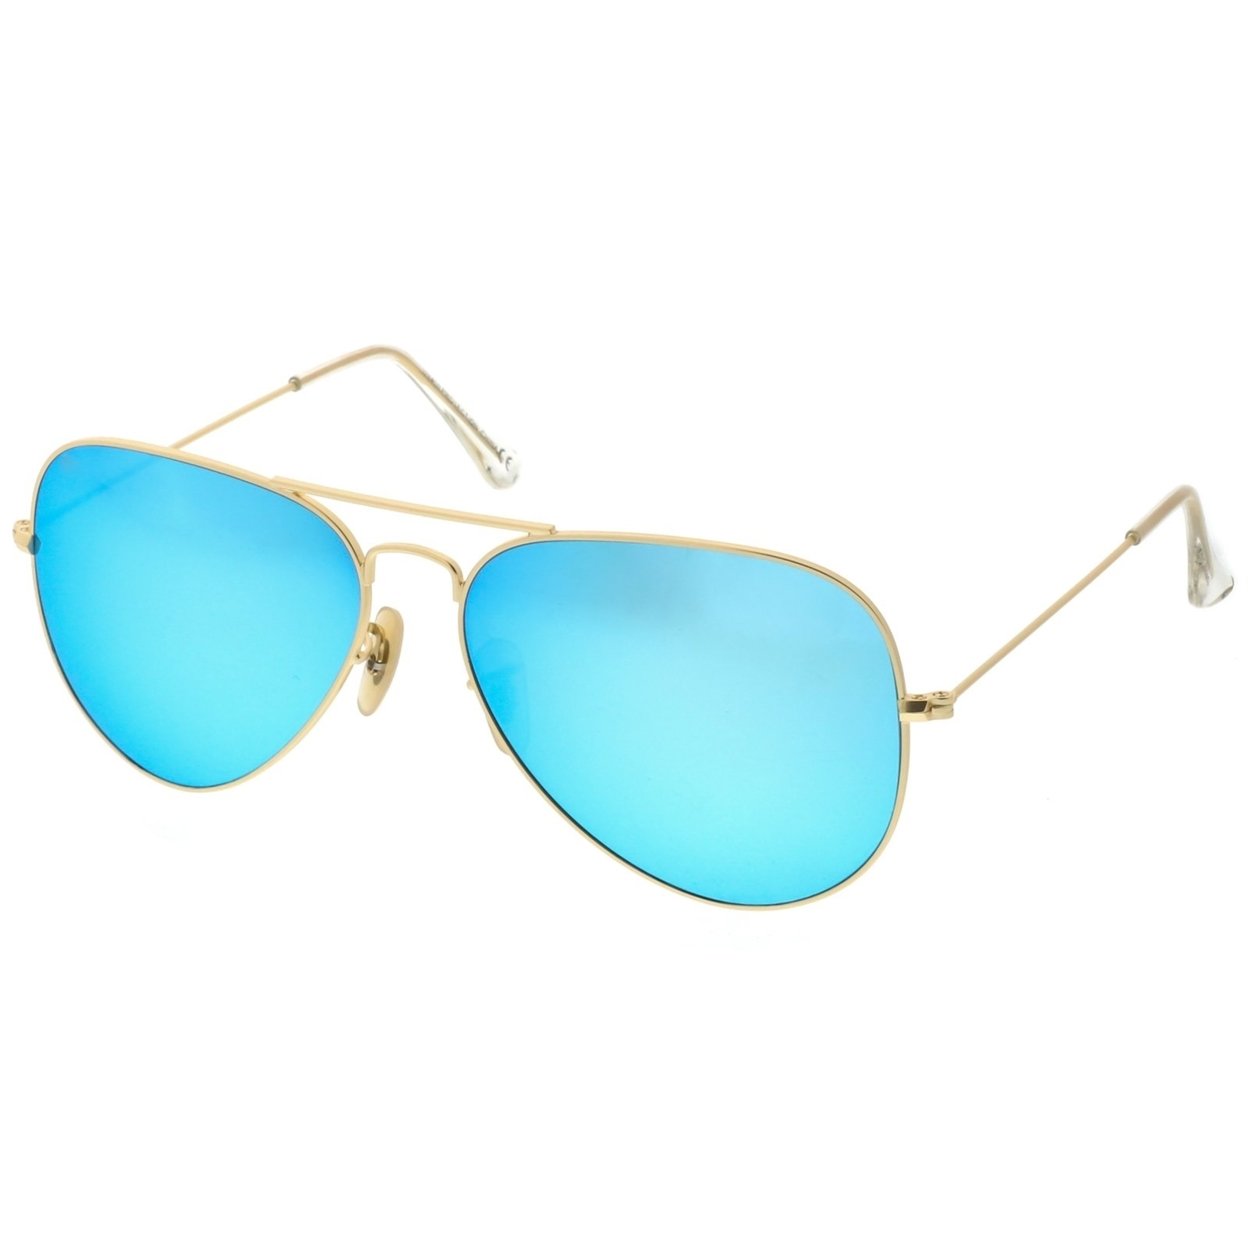 Premium Large Classic Matte Metal Aviator Sunglasses With Colored Mirror Glass Lens 61mm - Gold / Pink Mirror